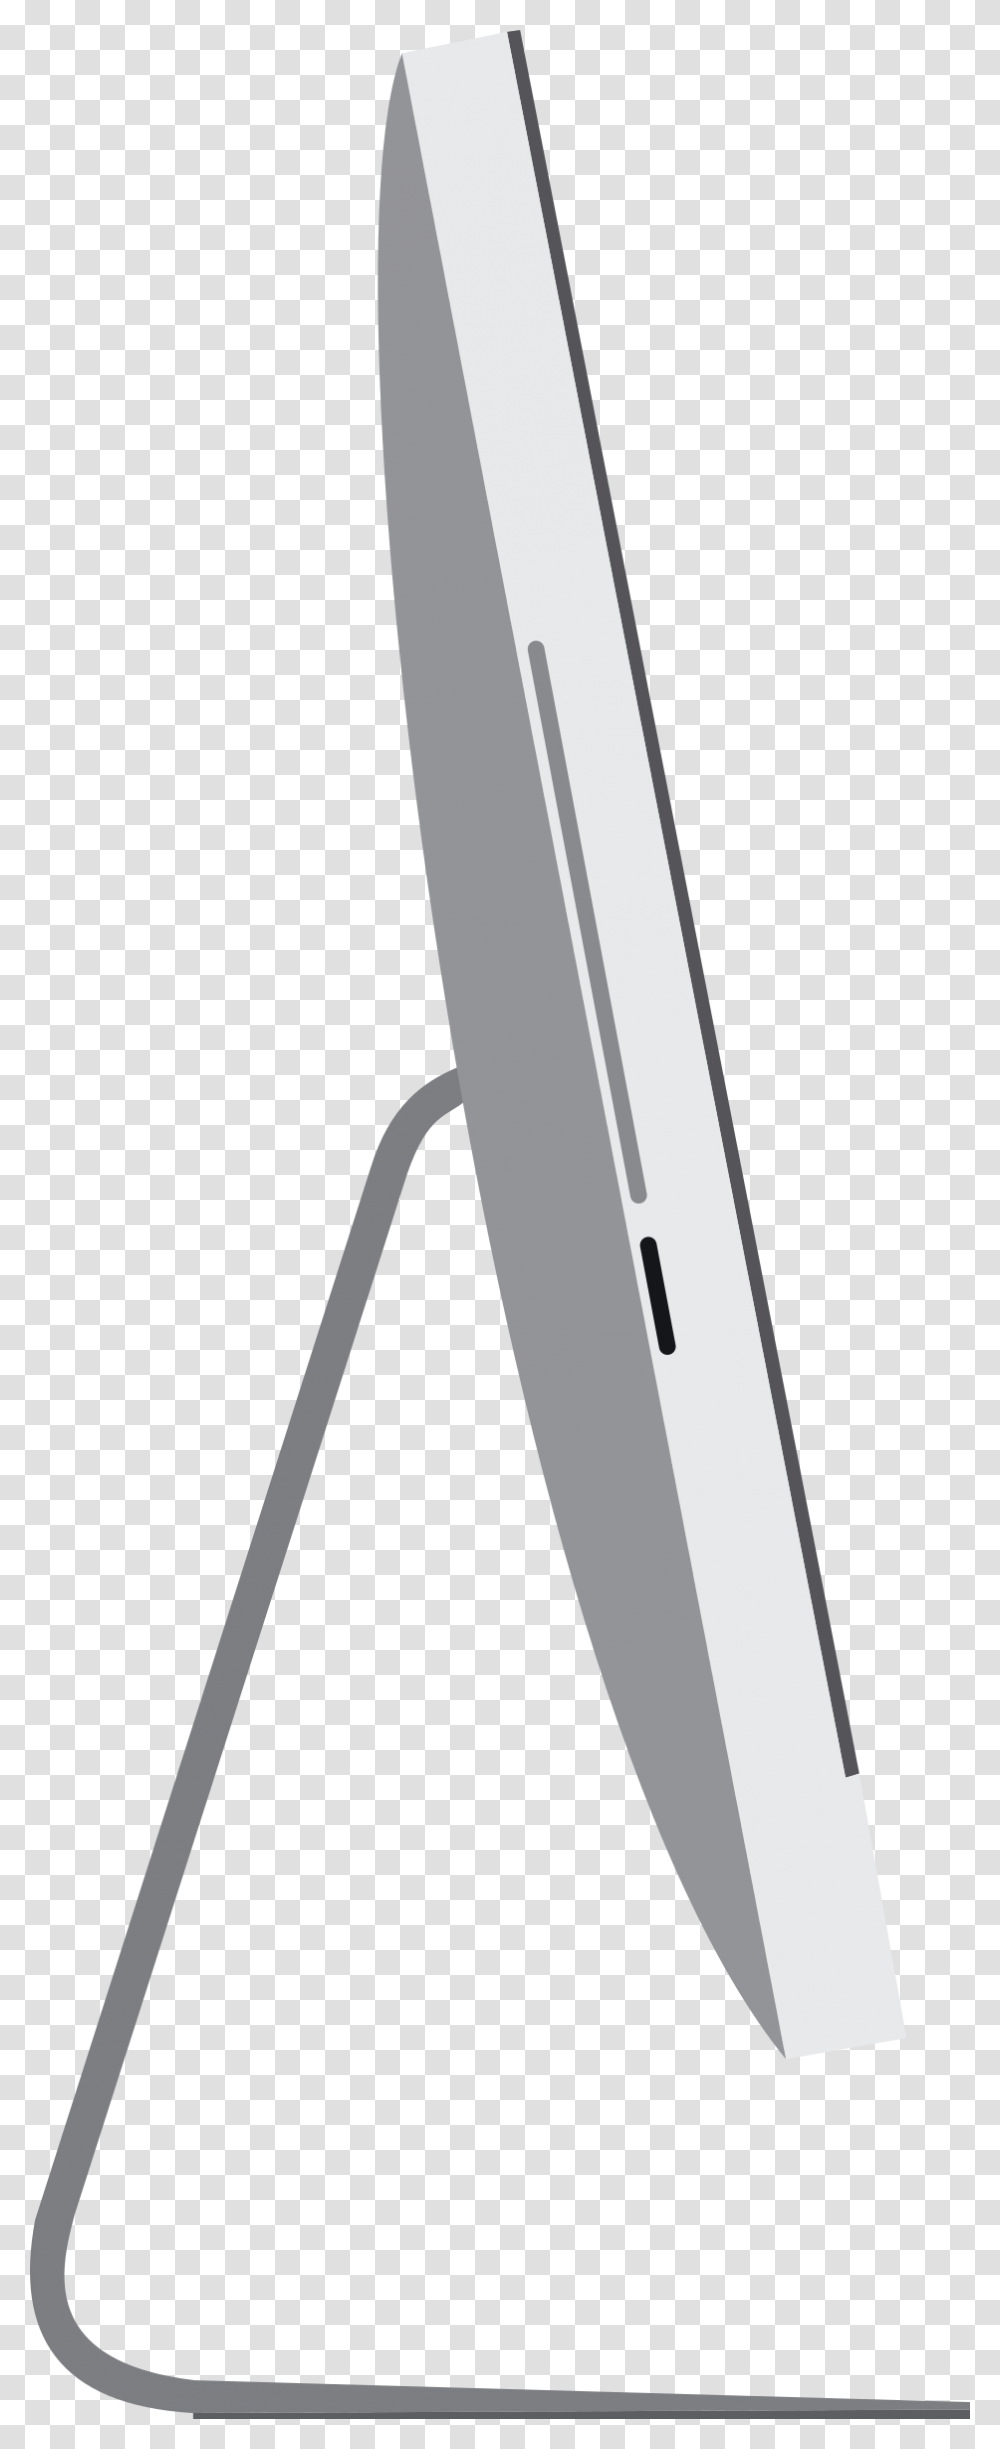 Imac Side On Clip Arts Wedge, Sword, Chair, Electronics, Tool Transparent Png